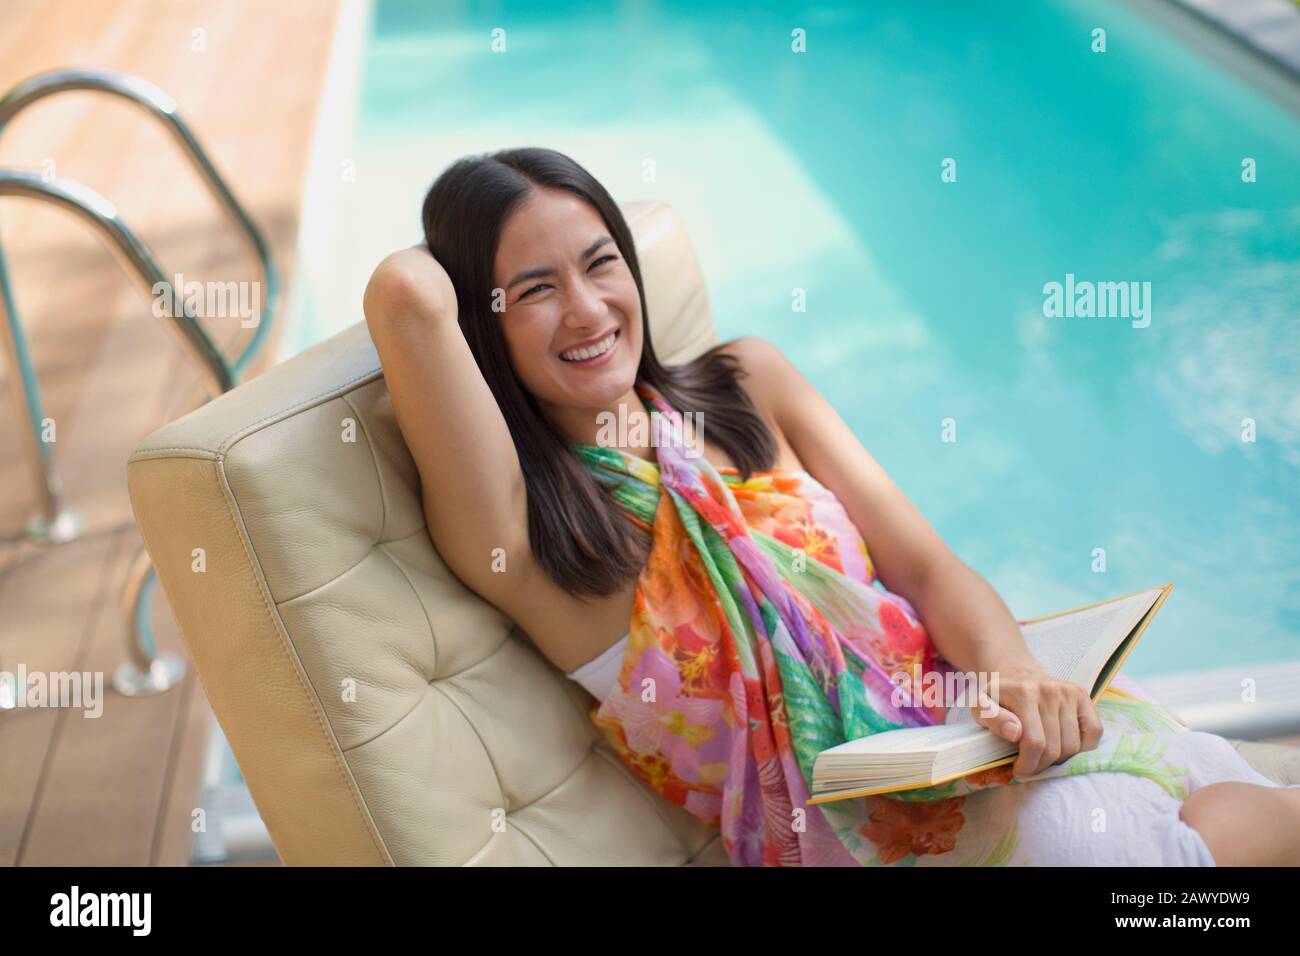 Portrait happy, laughing woman reading book on lounge chair at summer poolside Stock Photo